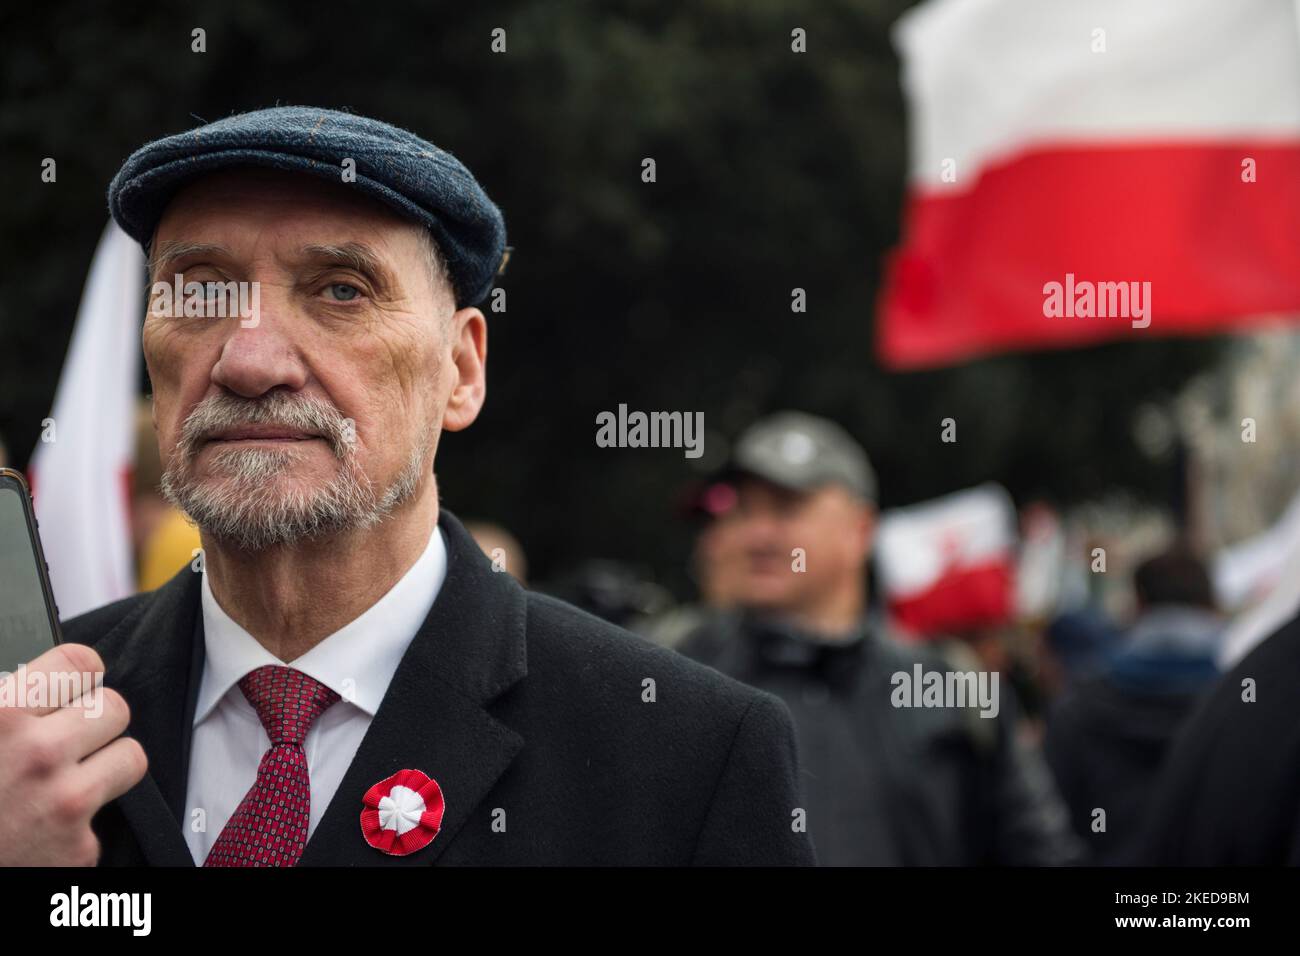 Warsaw, Poland. 11th Nov 2022. Antoni Macierewicz, former Minister of National Defense seen during the Independence March. Poland's National Independence Day marks the anniversary of the country's independence in 1918. It is celebrated as a nationwide holiday on November 11 each year. This year again tens of thousands of Poles took part in the Independence March in Warsaw organized by far-right organizations to celebrate the 104th anniversary of Poland's rebirth as an independent state. Credit: SOPA Images Limited/Alamy Live News Stock Photo